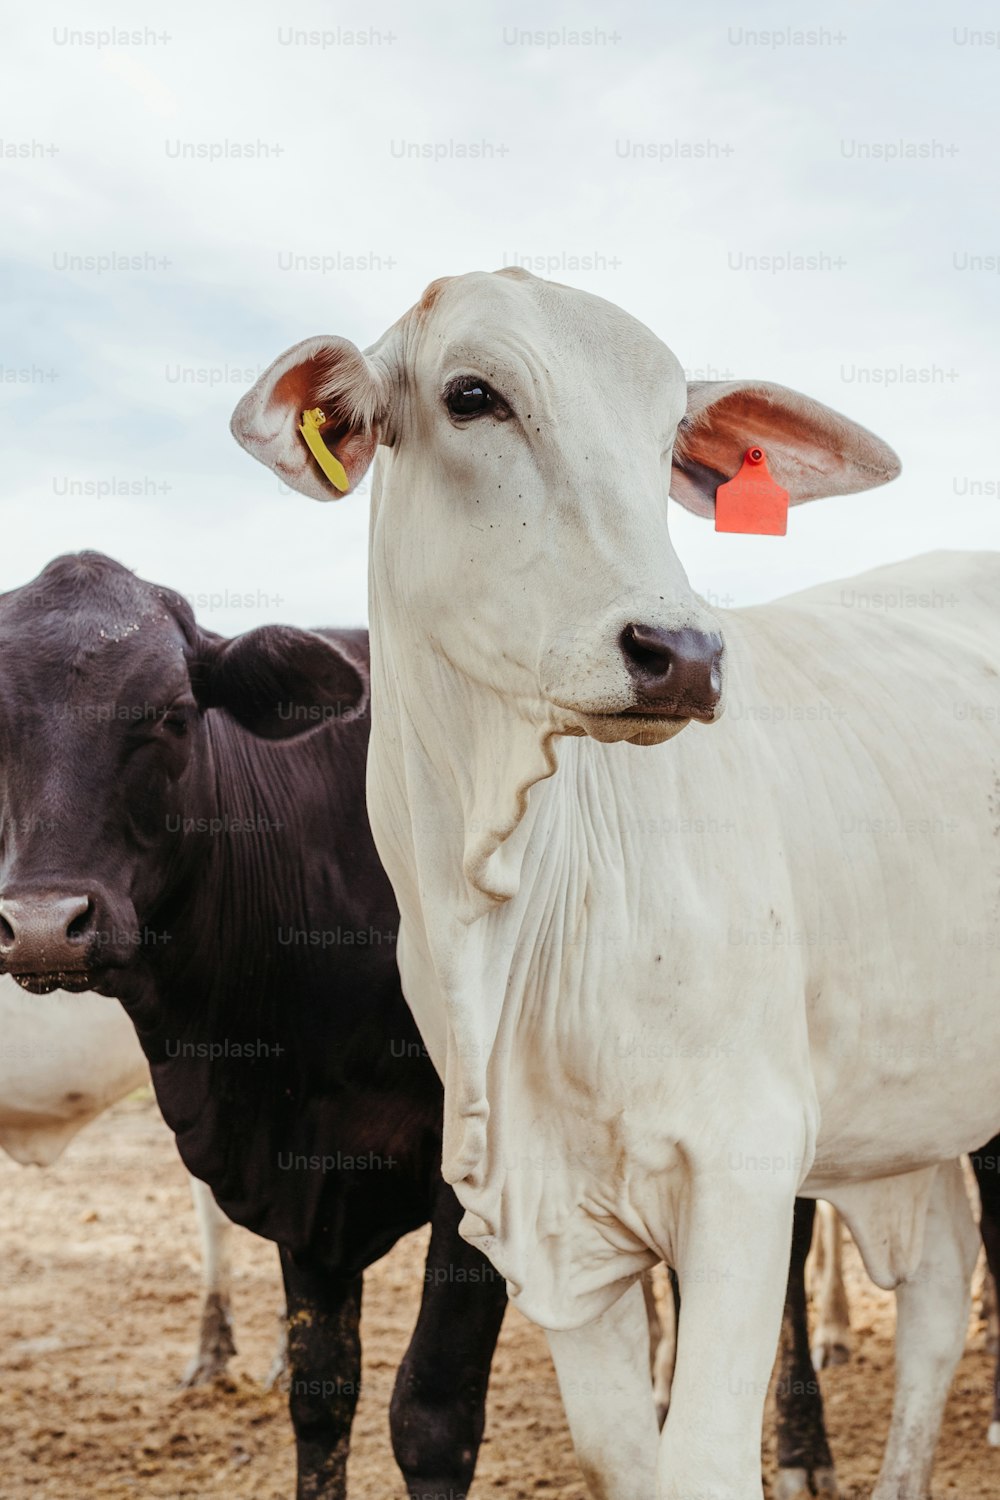 a couple of cows standing next to each other